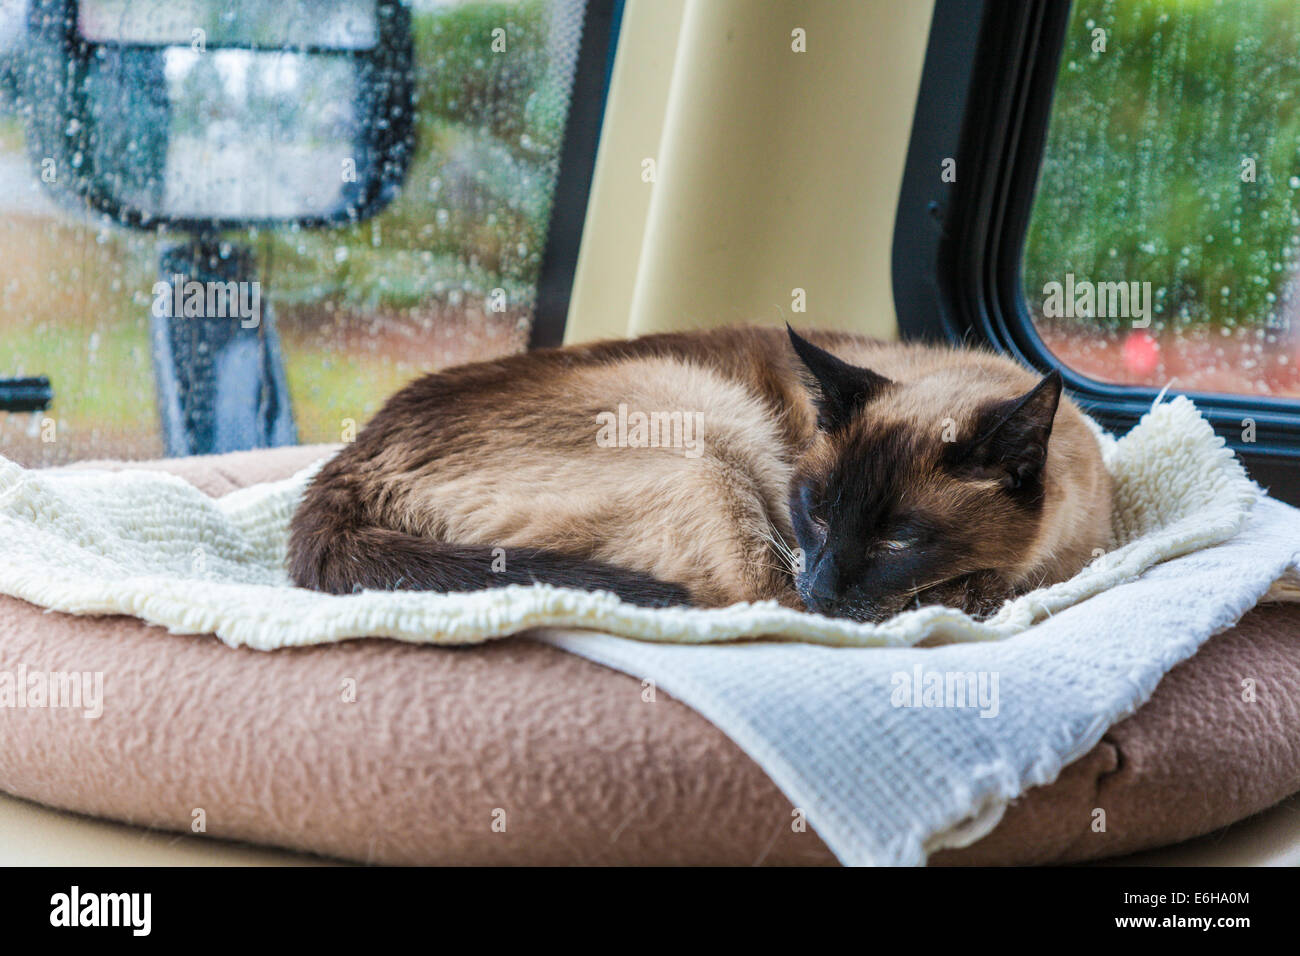 Pet Siamese cat lying on pillow on dash of vehicle Stock Photo